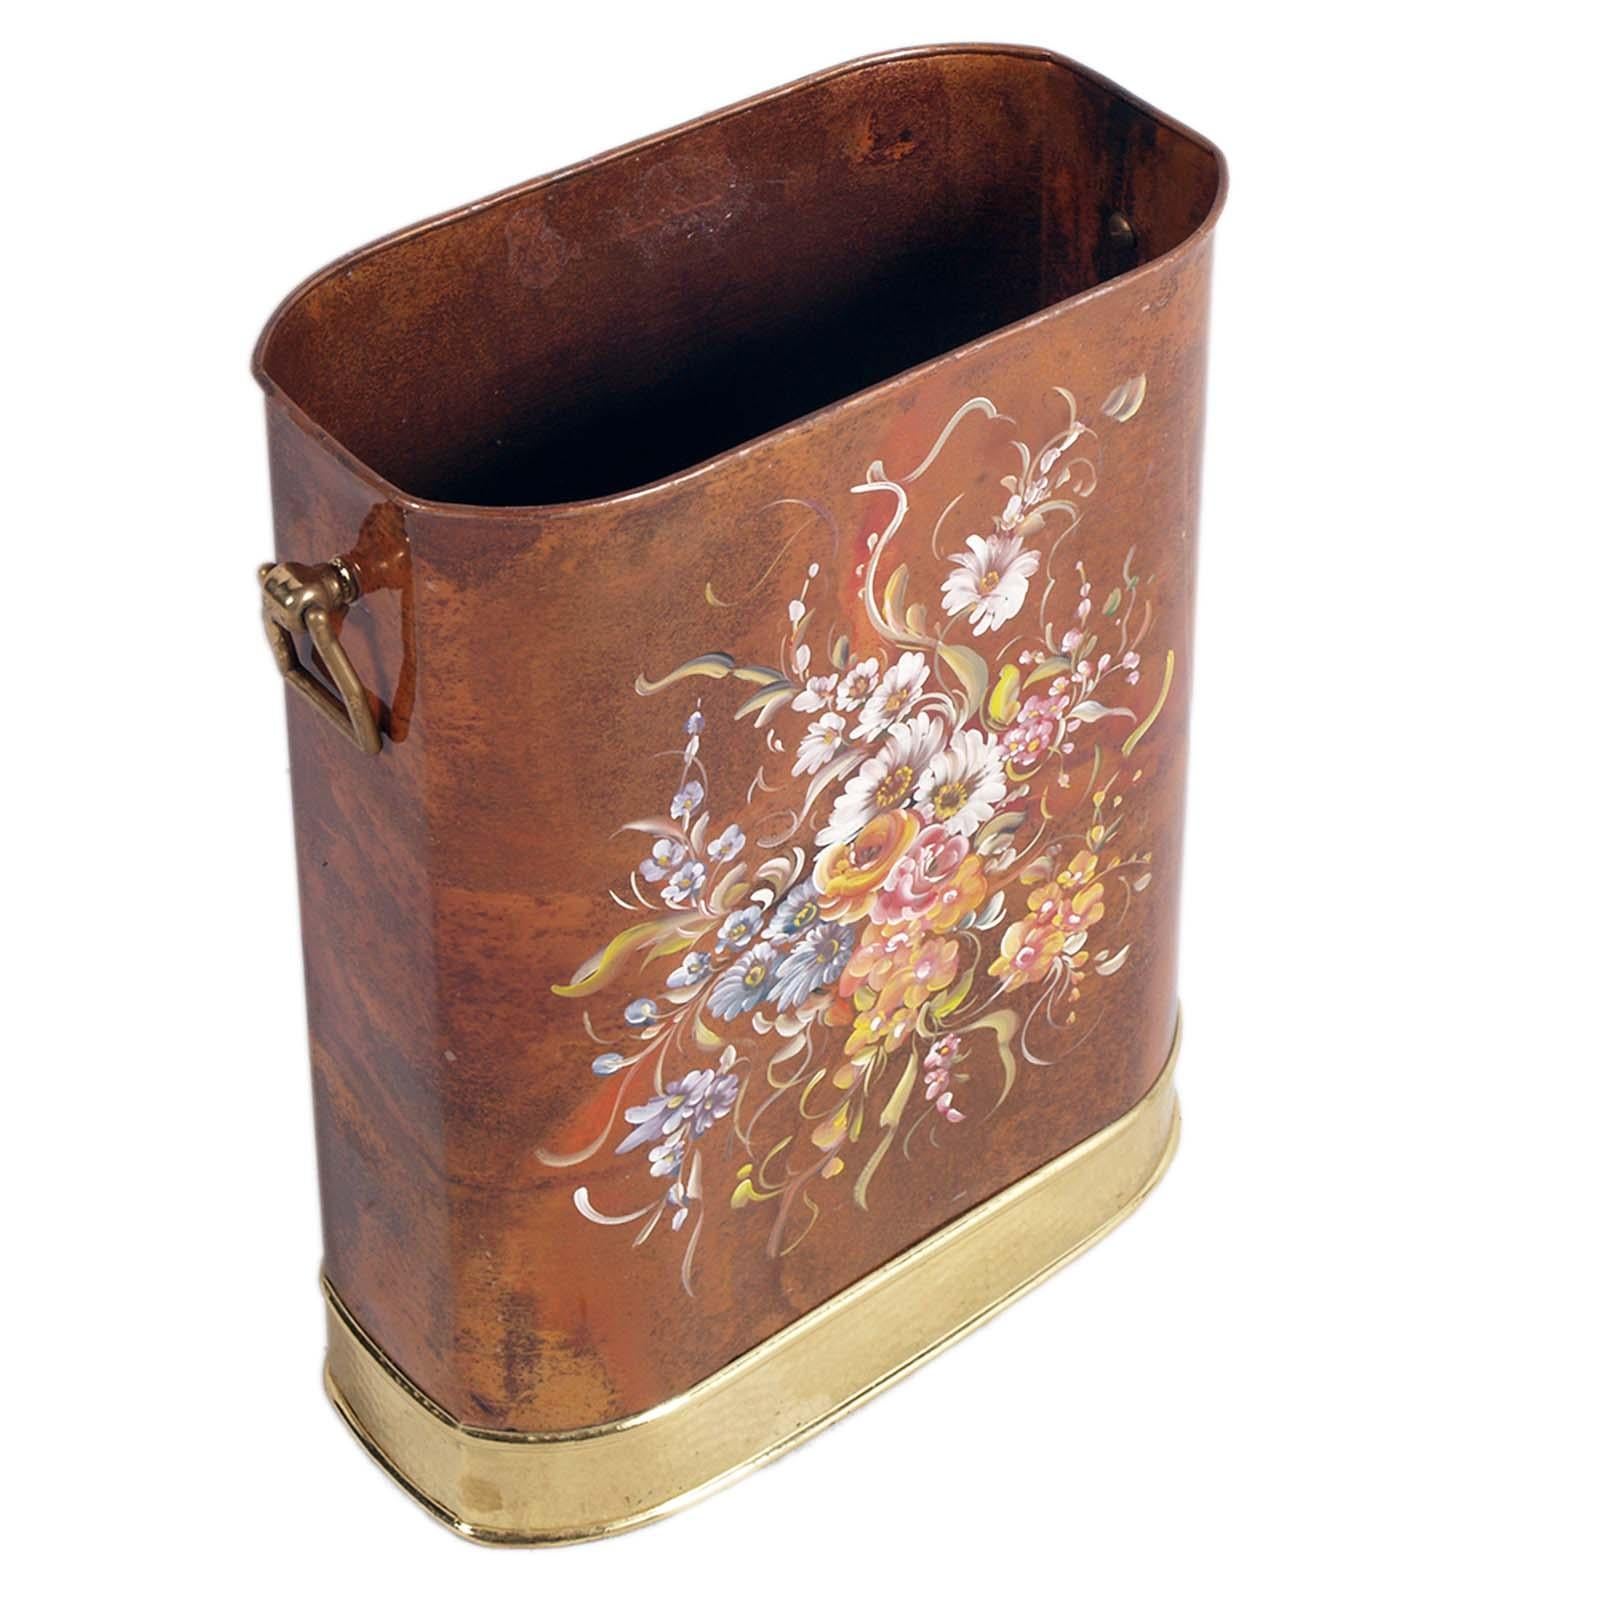 This collector's item is an umbrella stand in marbled copper, with accessories in gilded brass and hand painted with a floral motif, by Tommaso Barbi for Bottega Gadda - Milan -, circa 1970s, signed below. This heavy oval umbrella stand is crafted